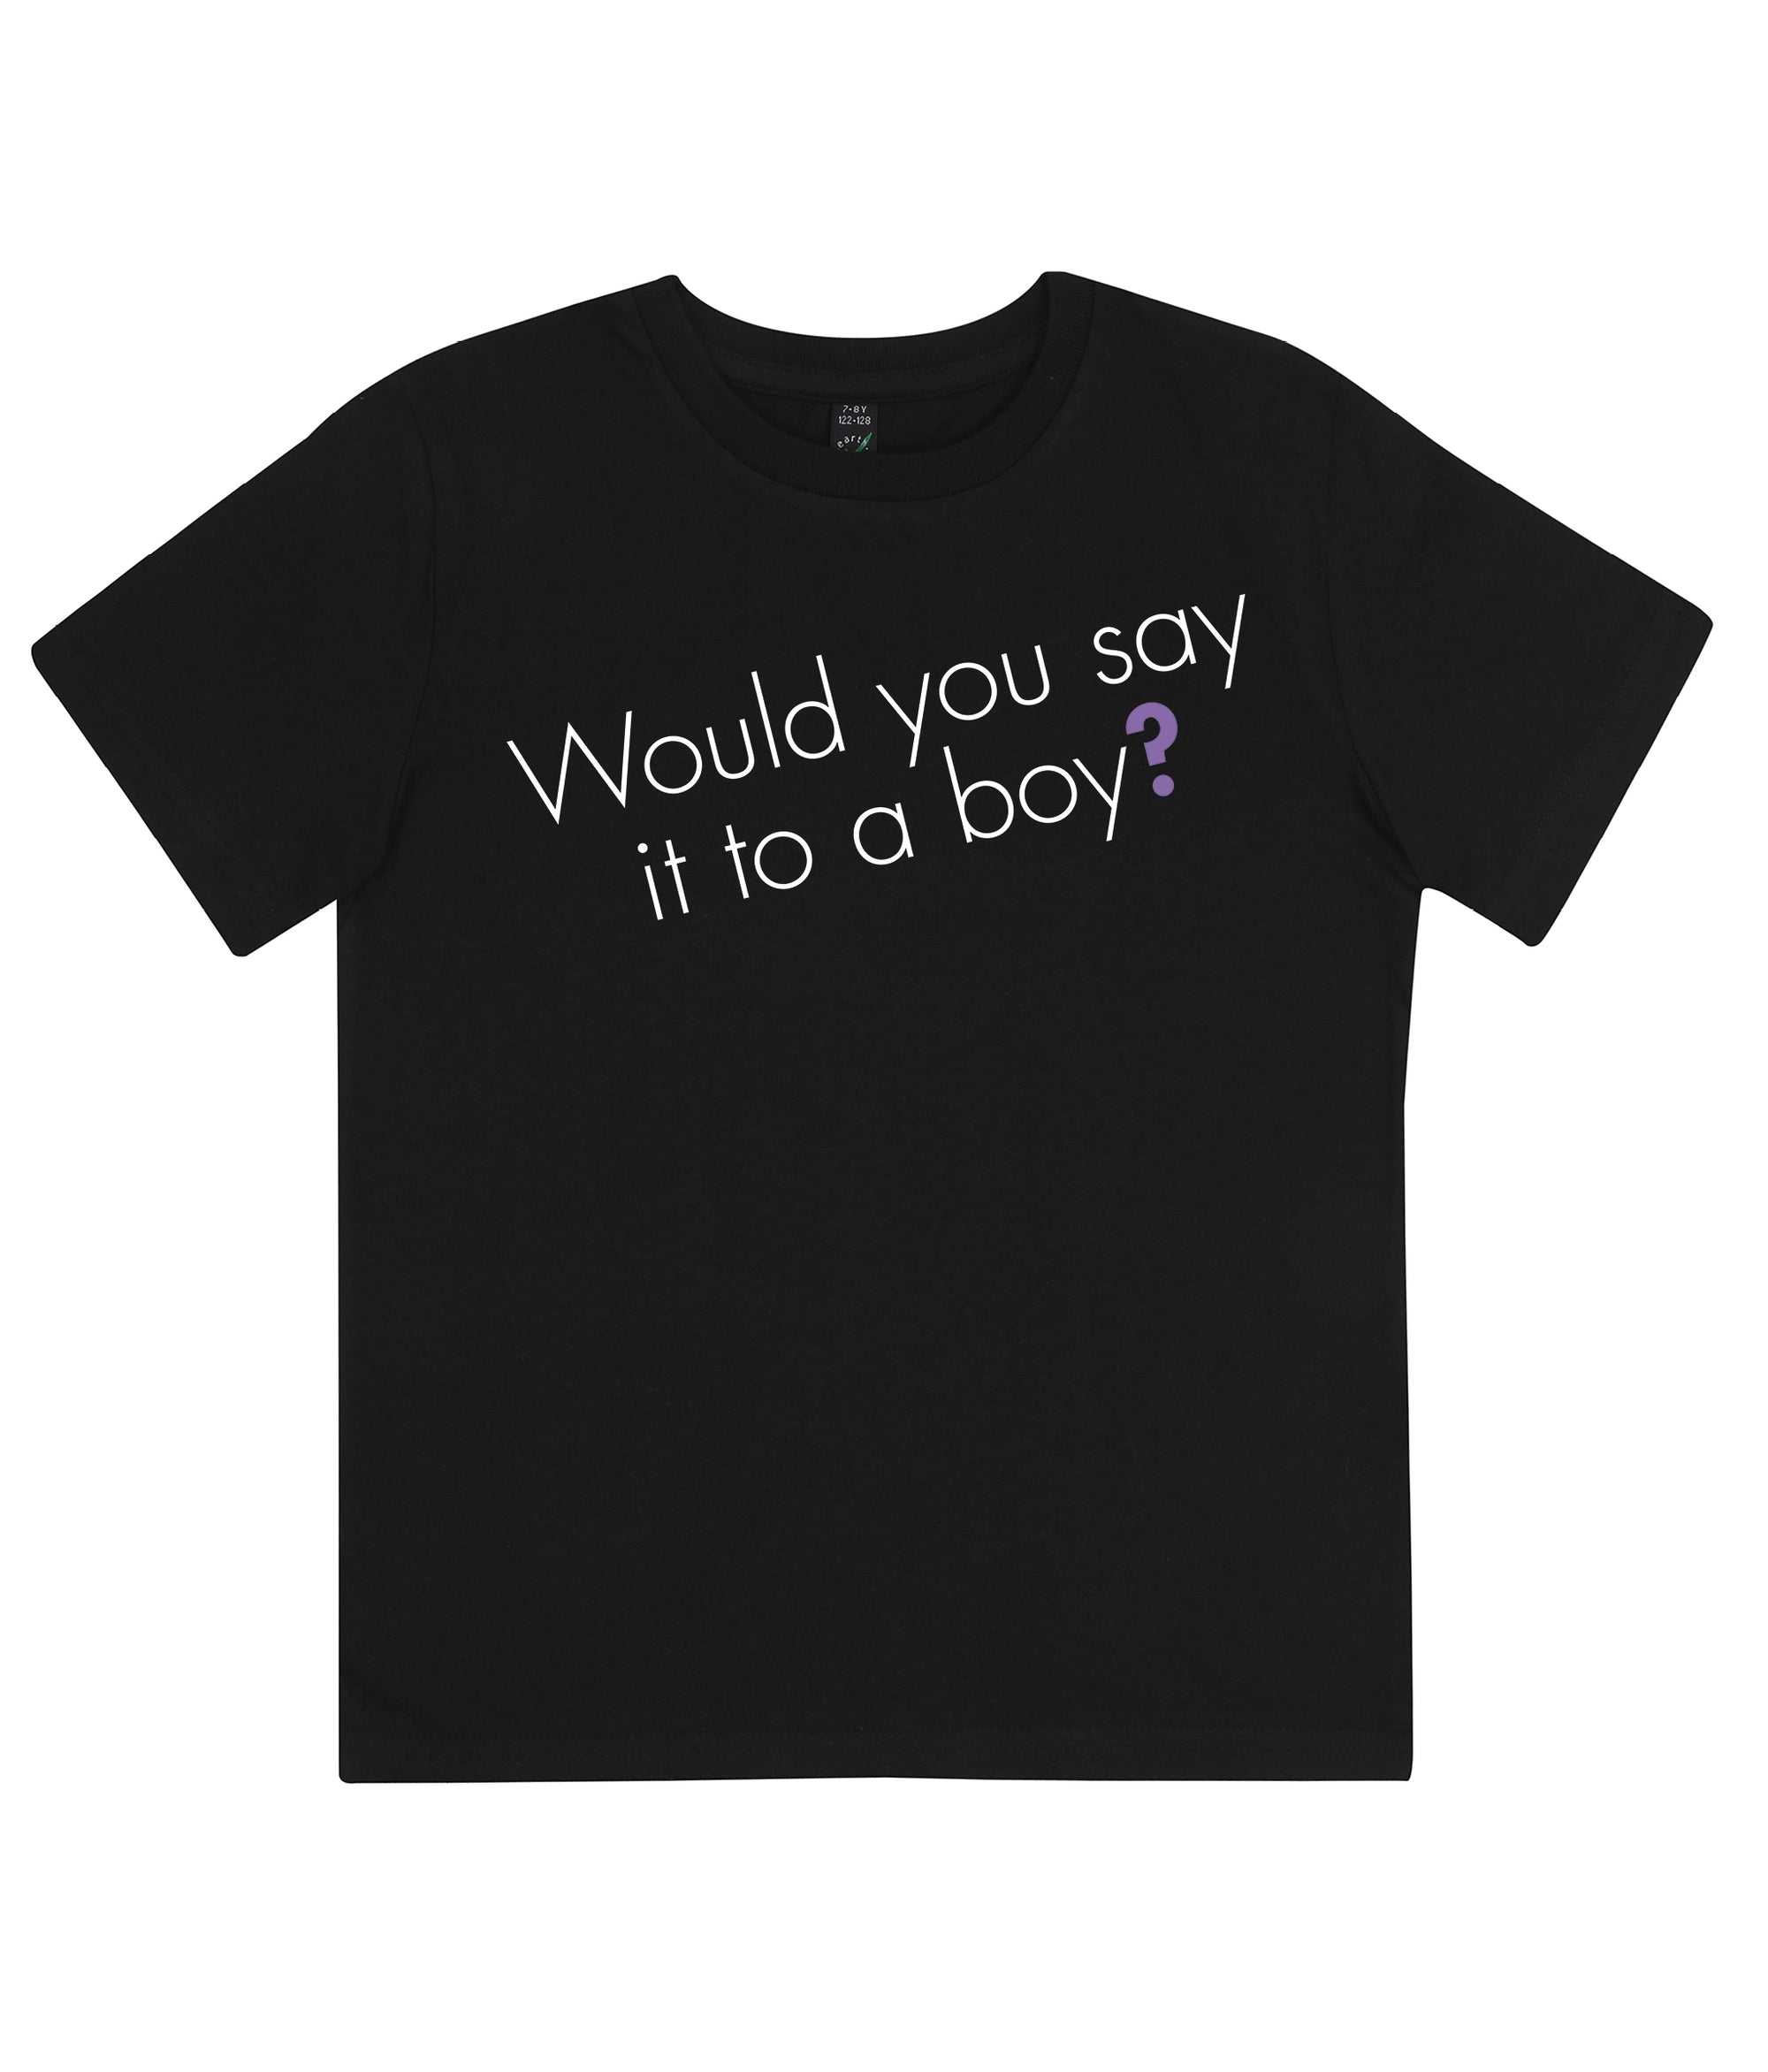 Would You Say It To A Boy Kids Organic Feminist T Shirt Black